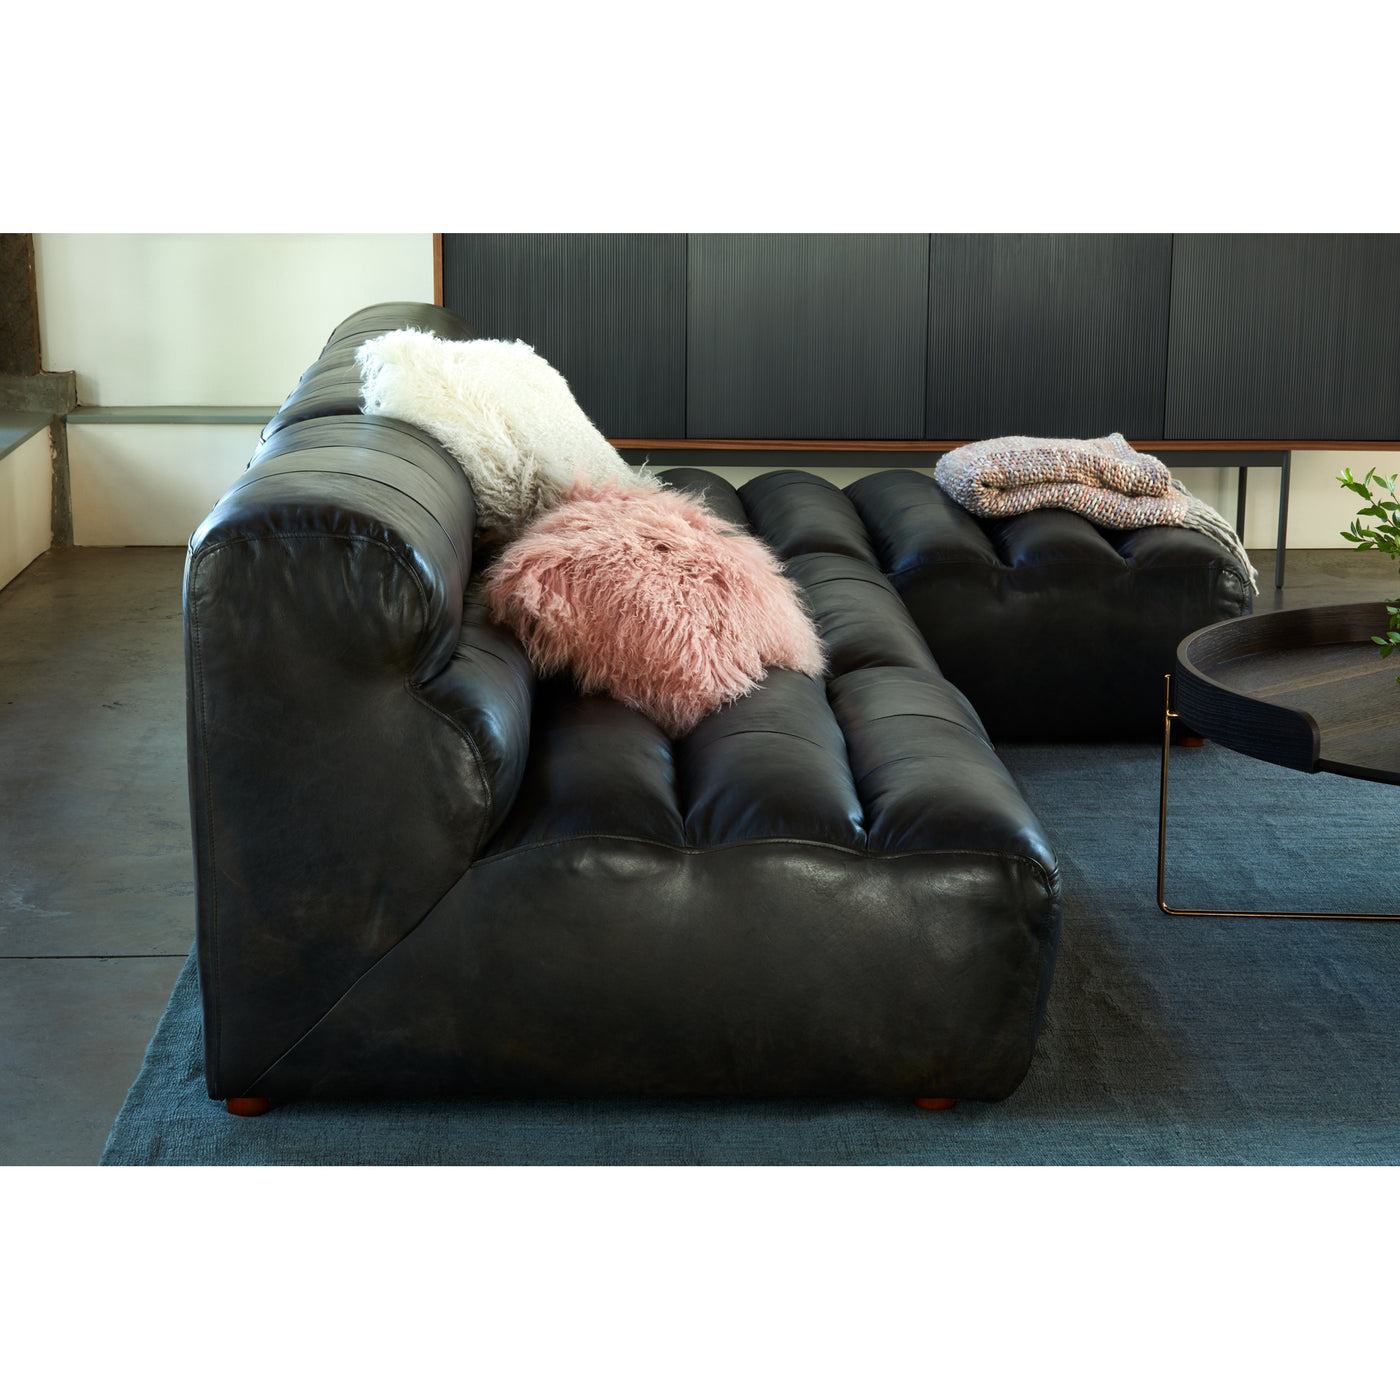 With a low profile and thick cushions, the Ramsay Leather Slipper Chair is the perfect addition to your living room. A sof...